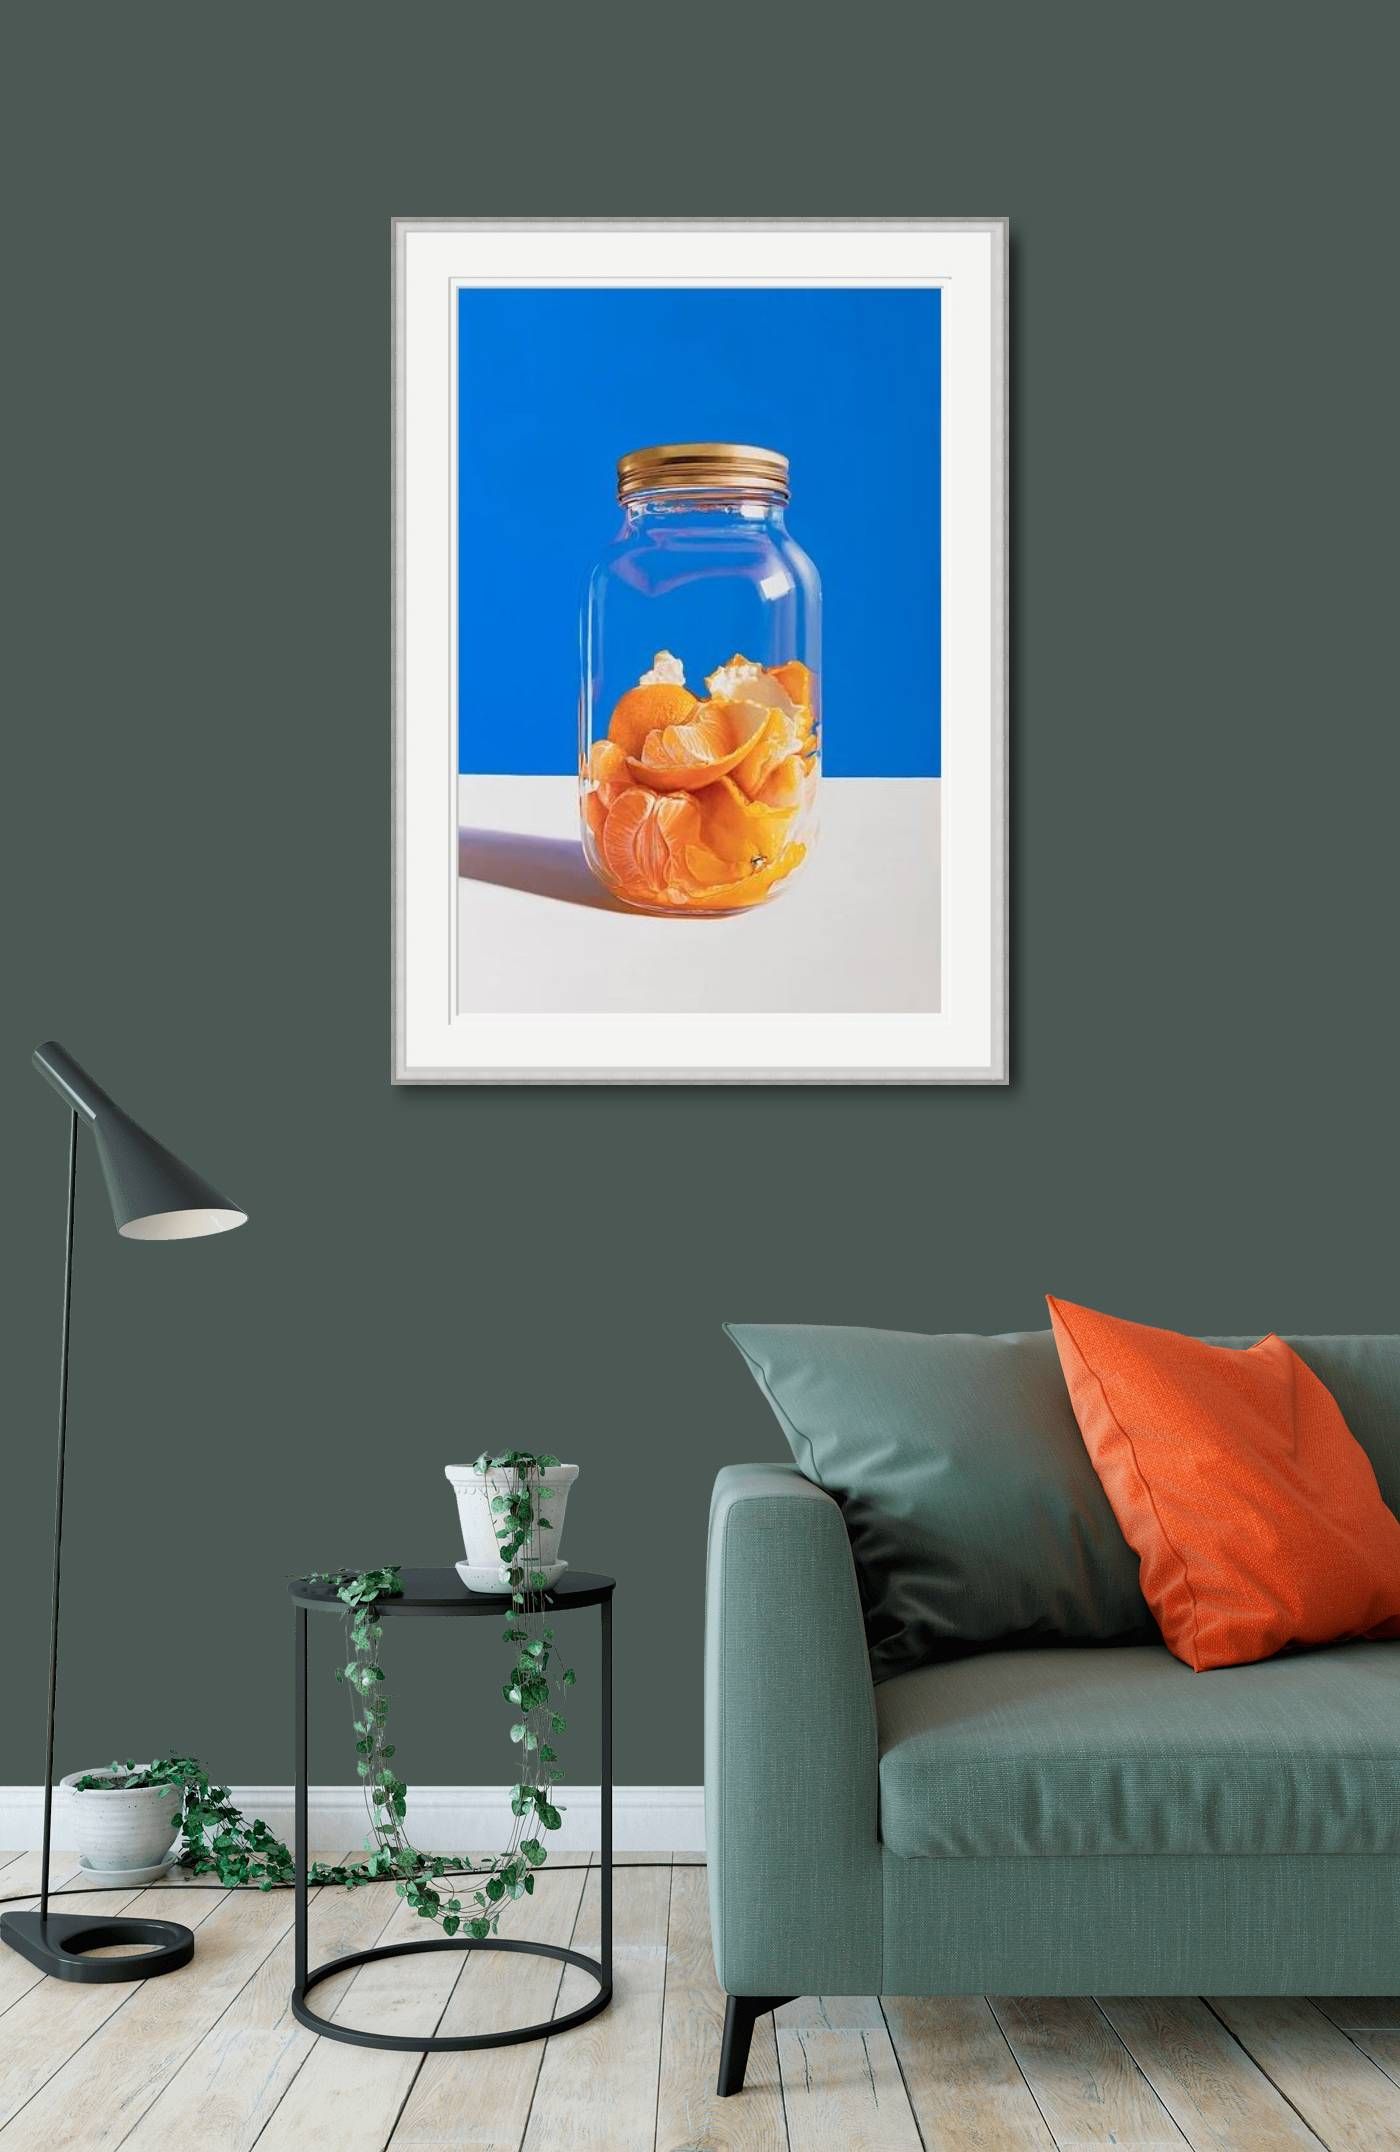 Small  - Oranges in Jar by Stephen Johntson